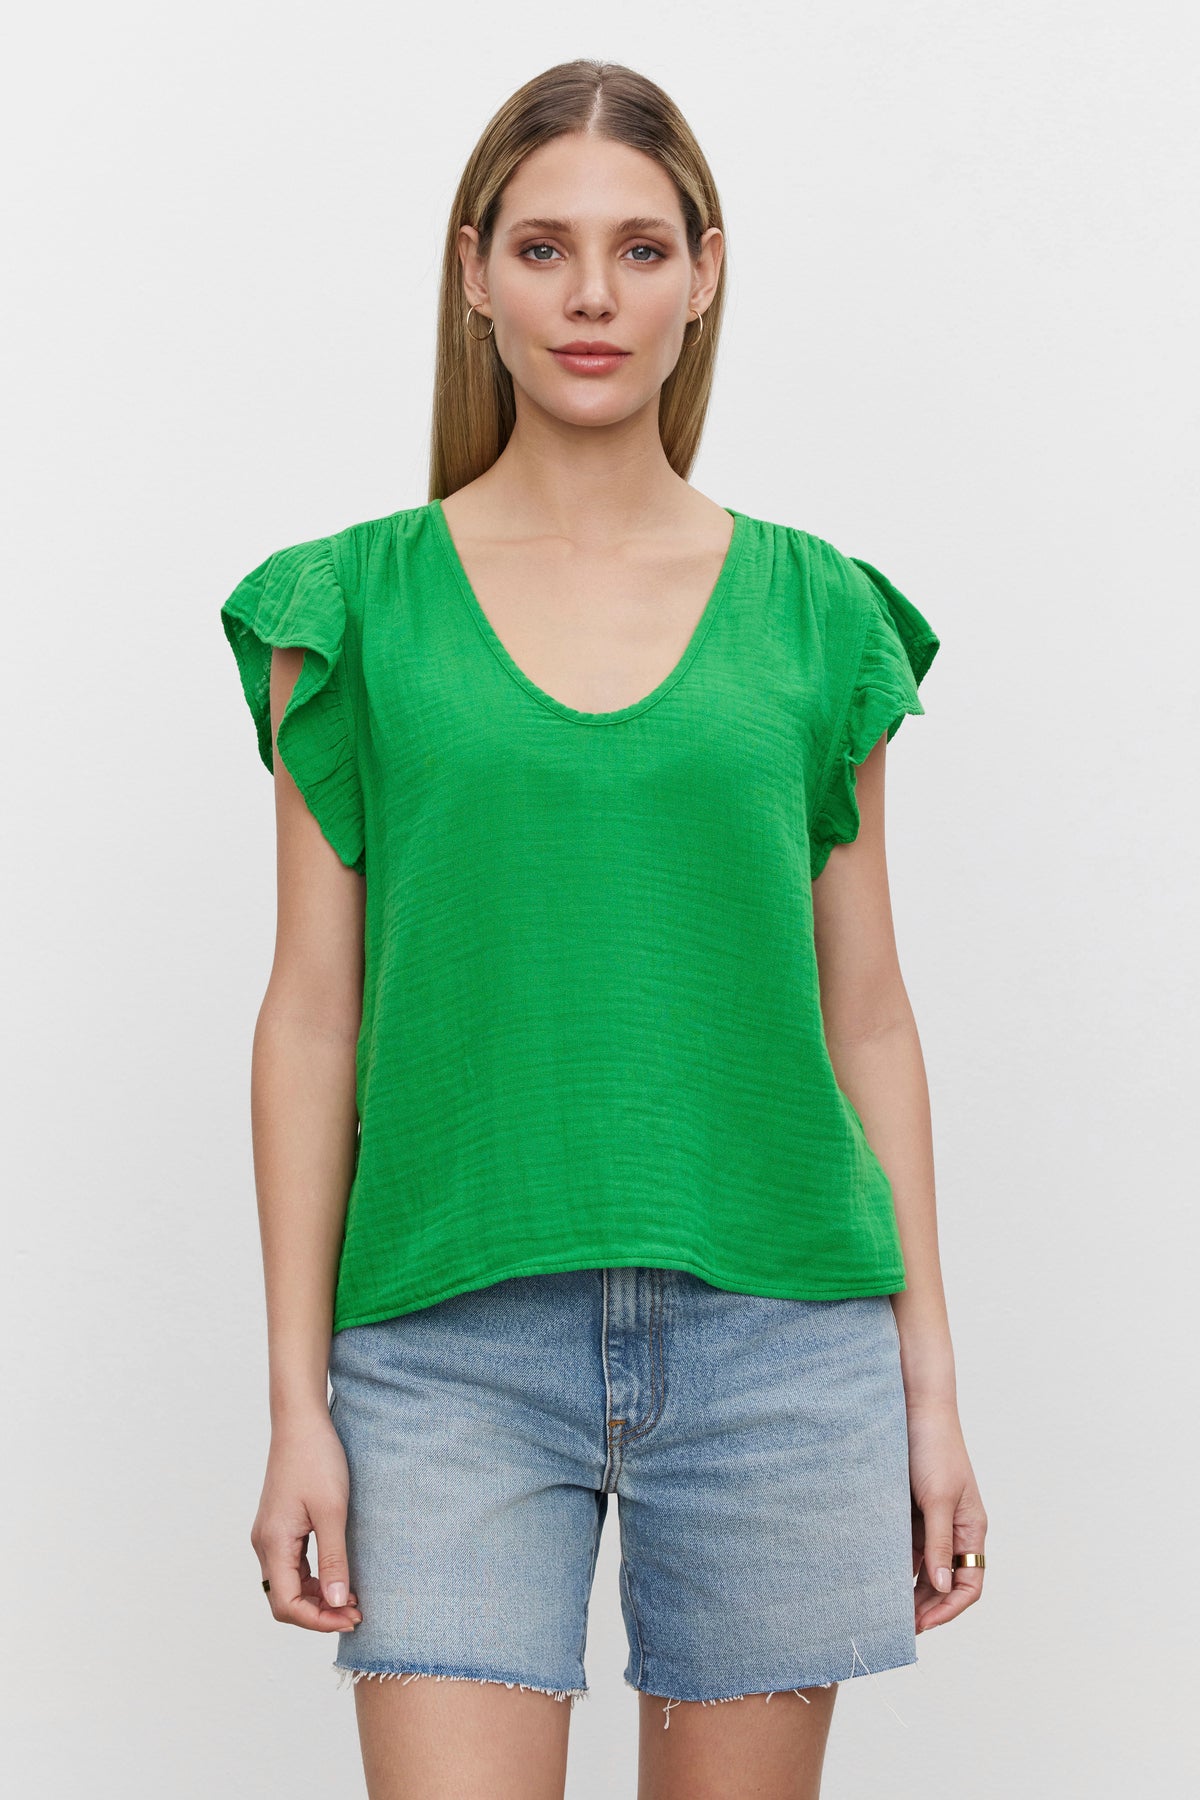   The model is wearing a REMI RUFFLE SLEEVE TOP from Velvet by Graham & Spencer, giving off a spring vibe. 